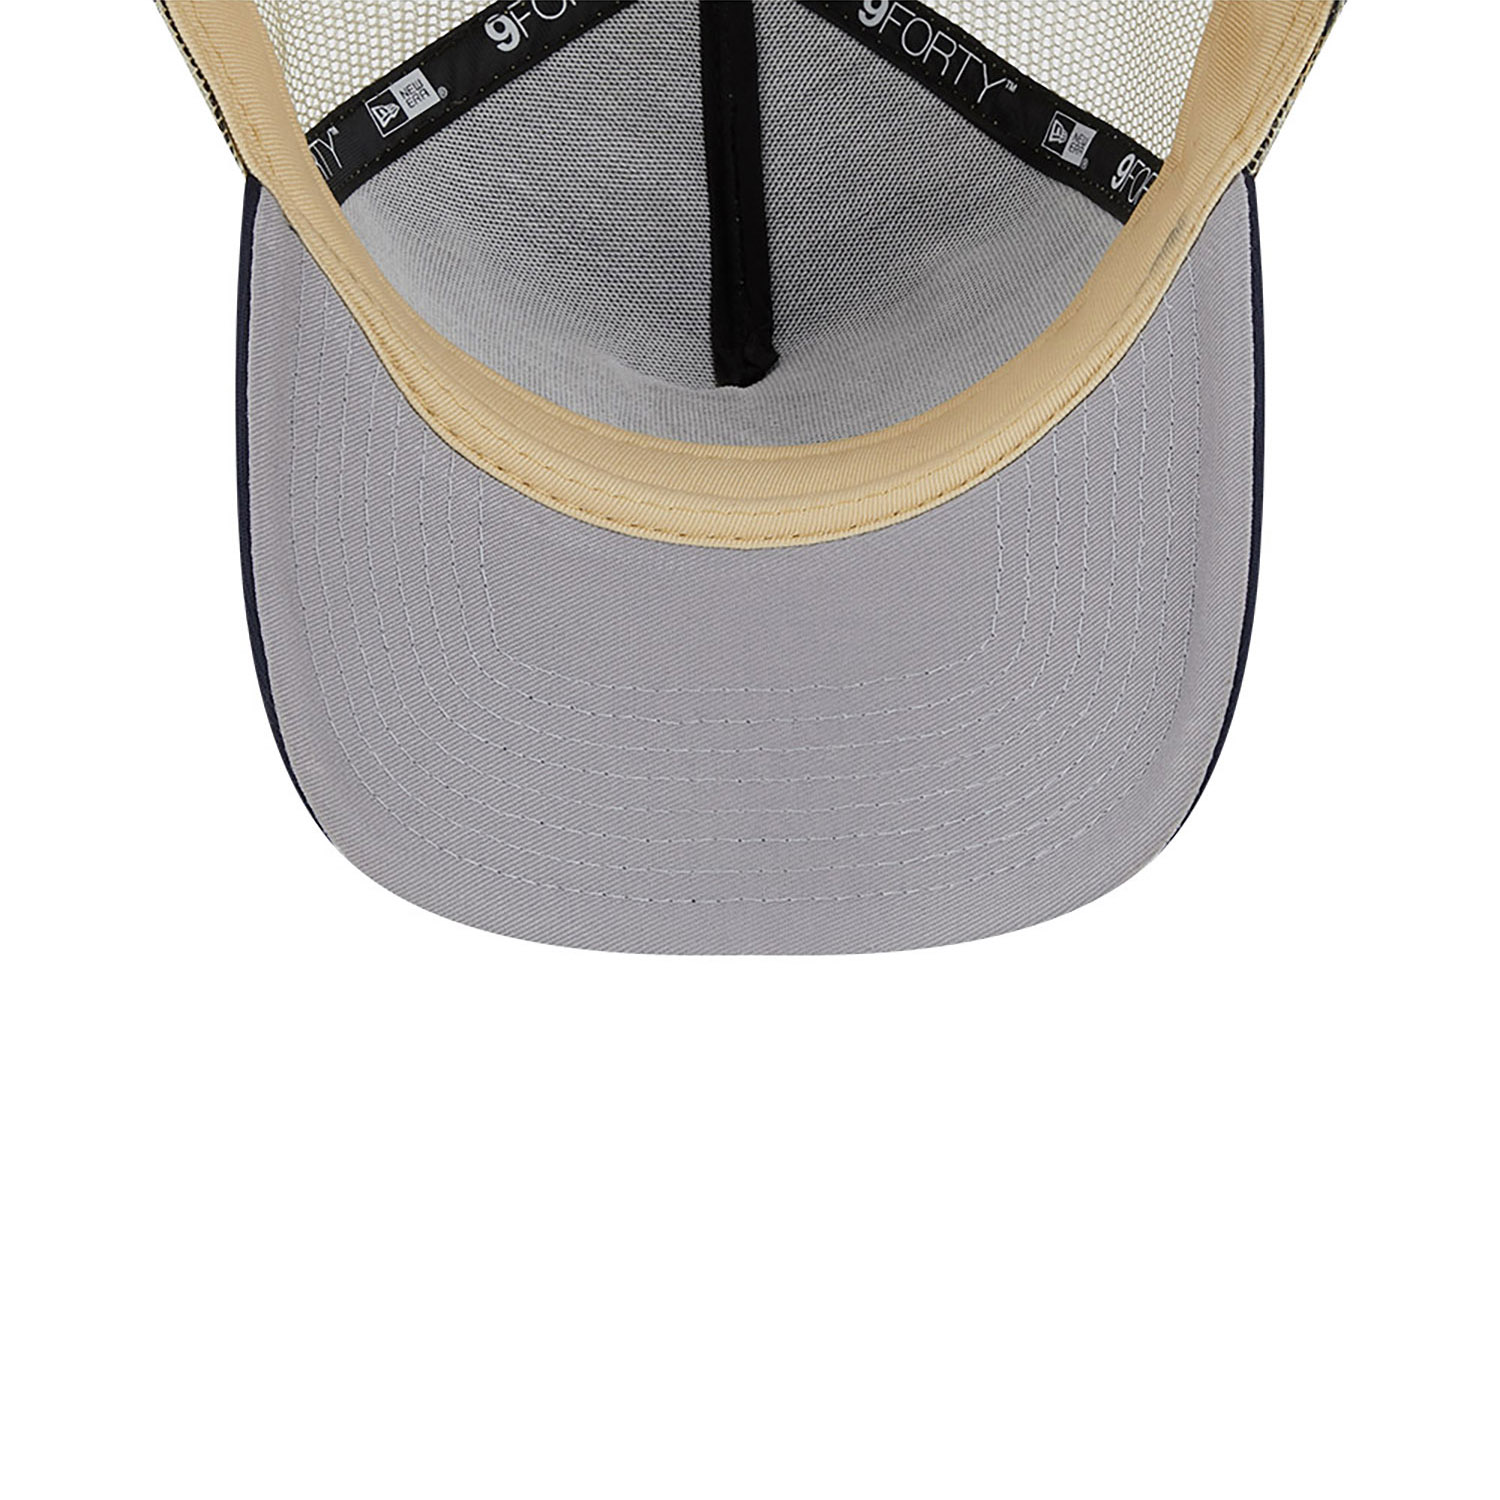 Beige San Francisco Giants All Day 9FORTY A-Frame Trucker Cap